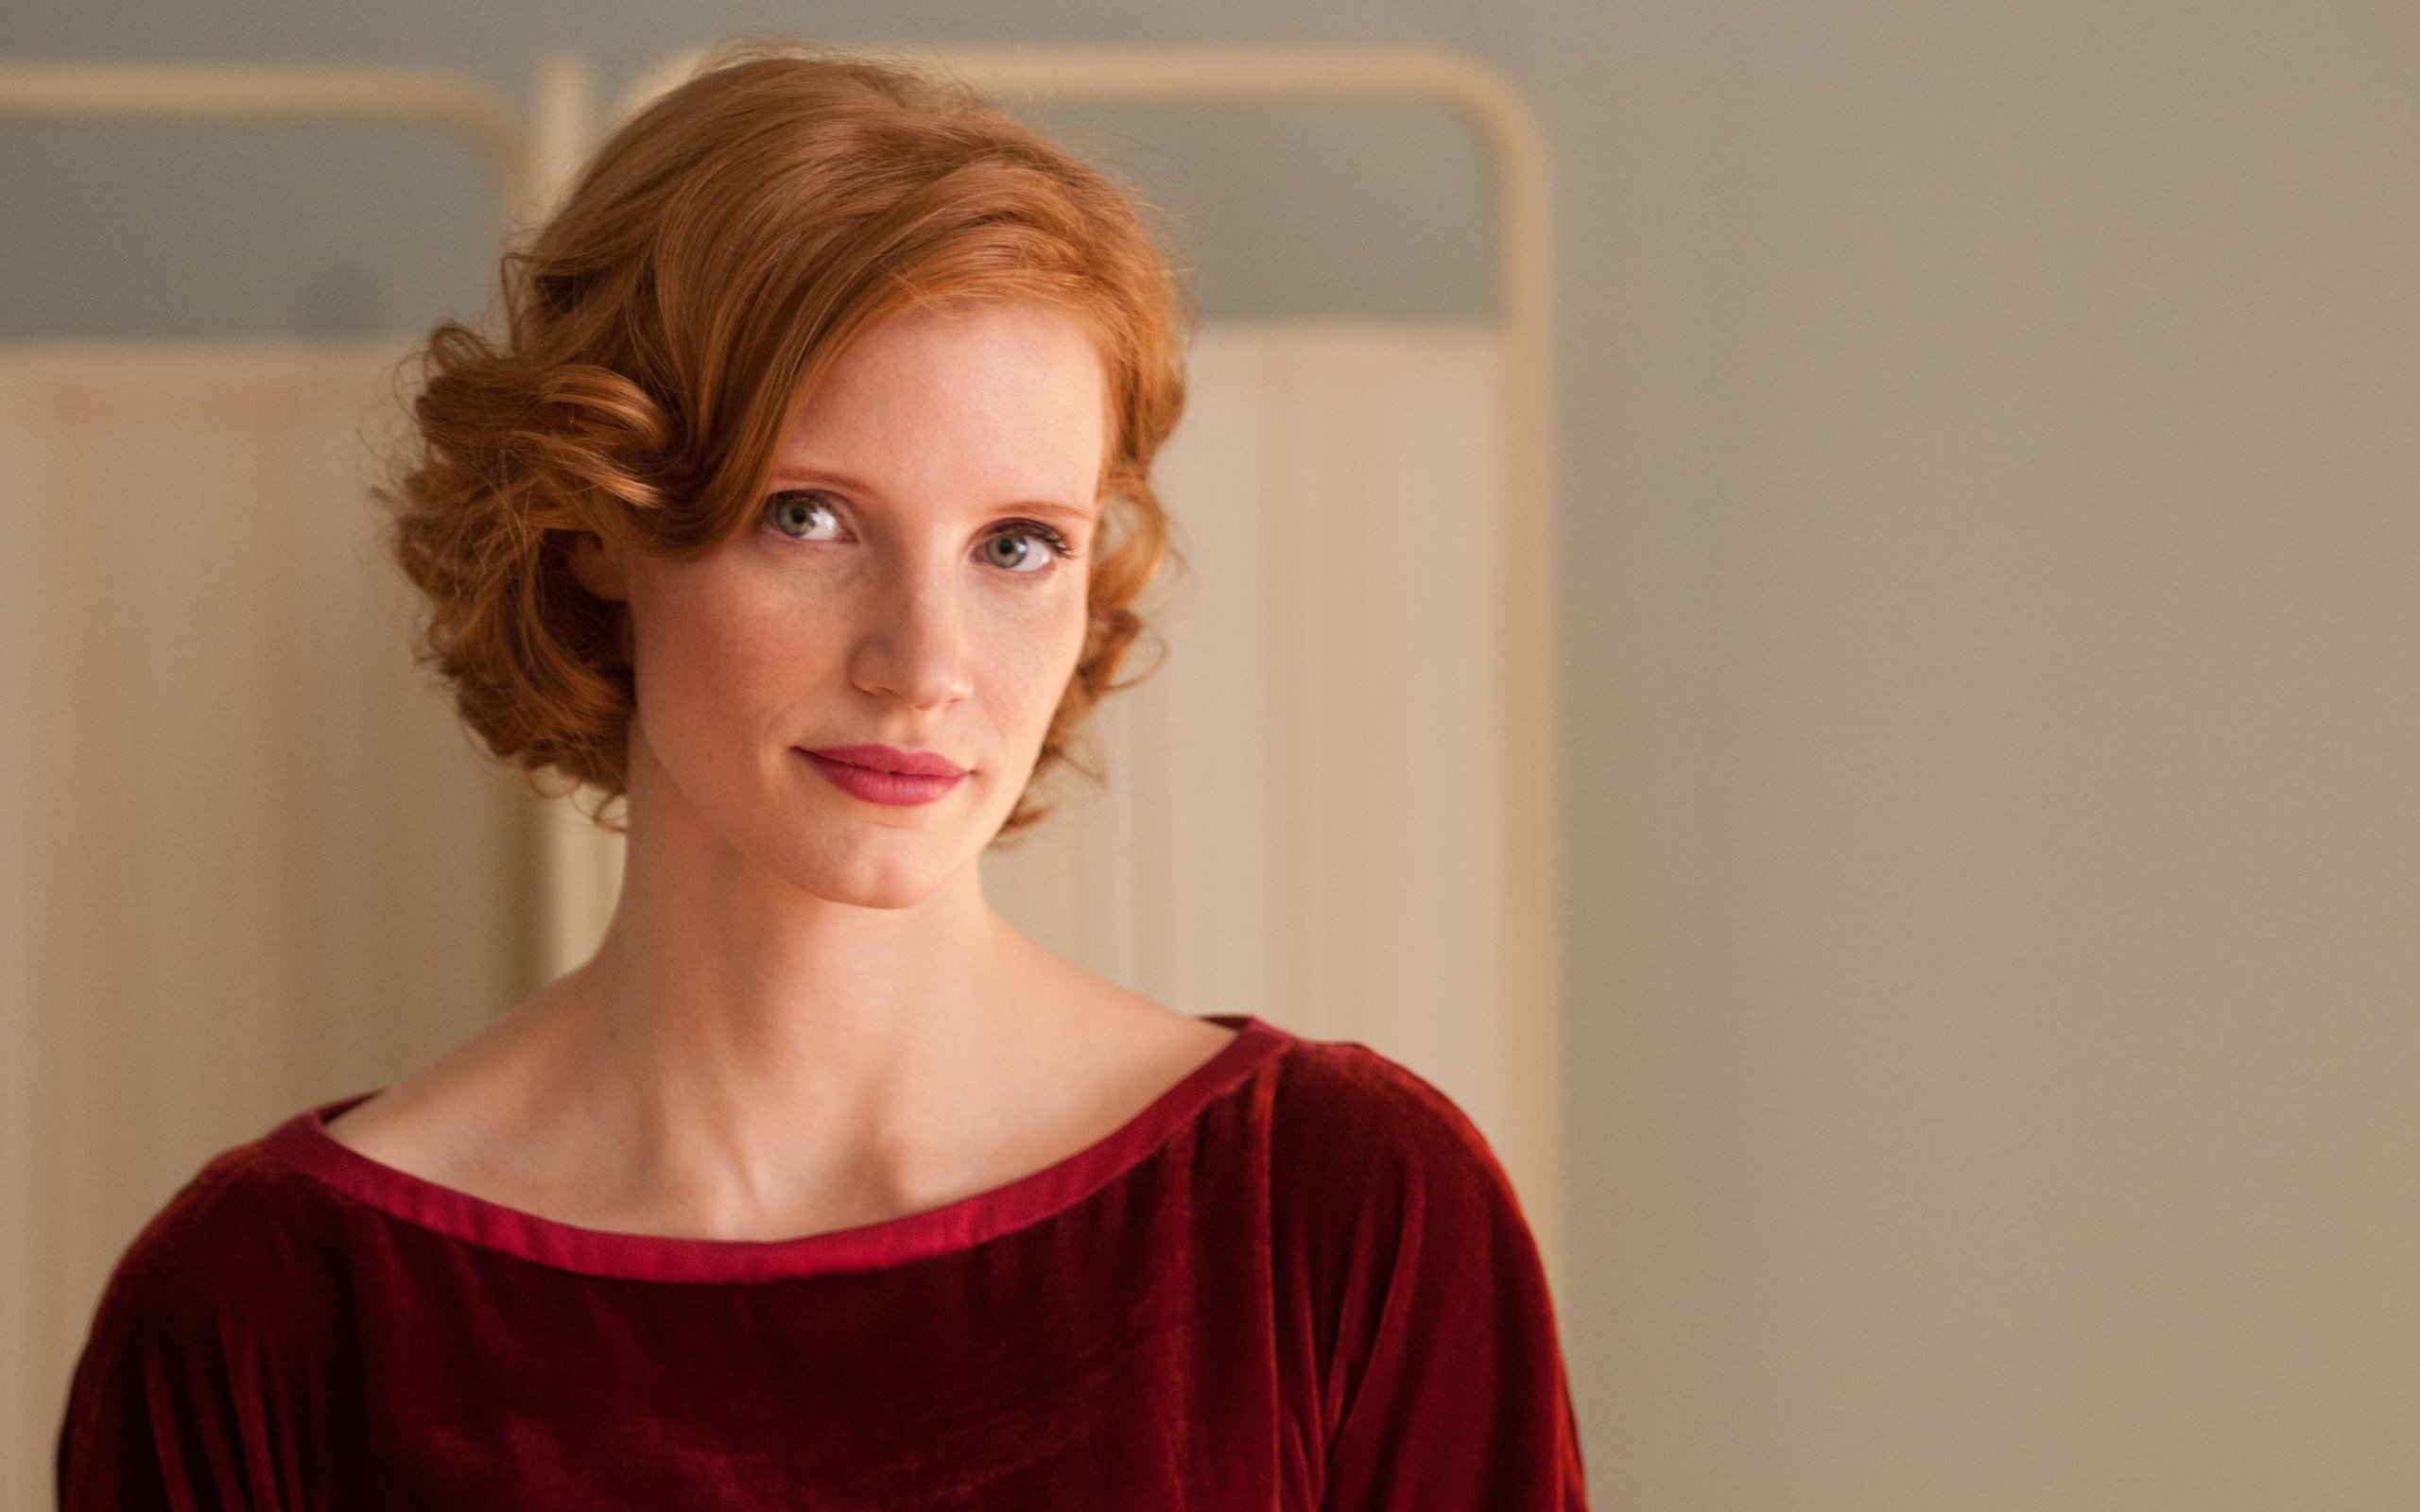 Jessica Chastain Women Redhead Actress Hd Wallpapers Desktop Images, Photos, Reviews